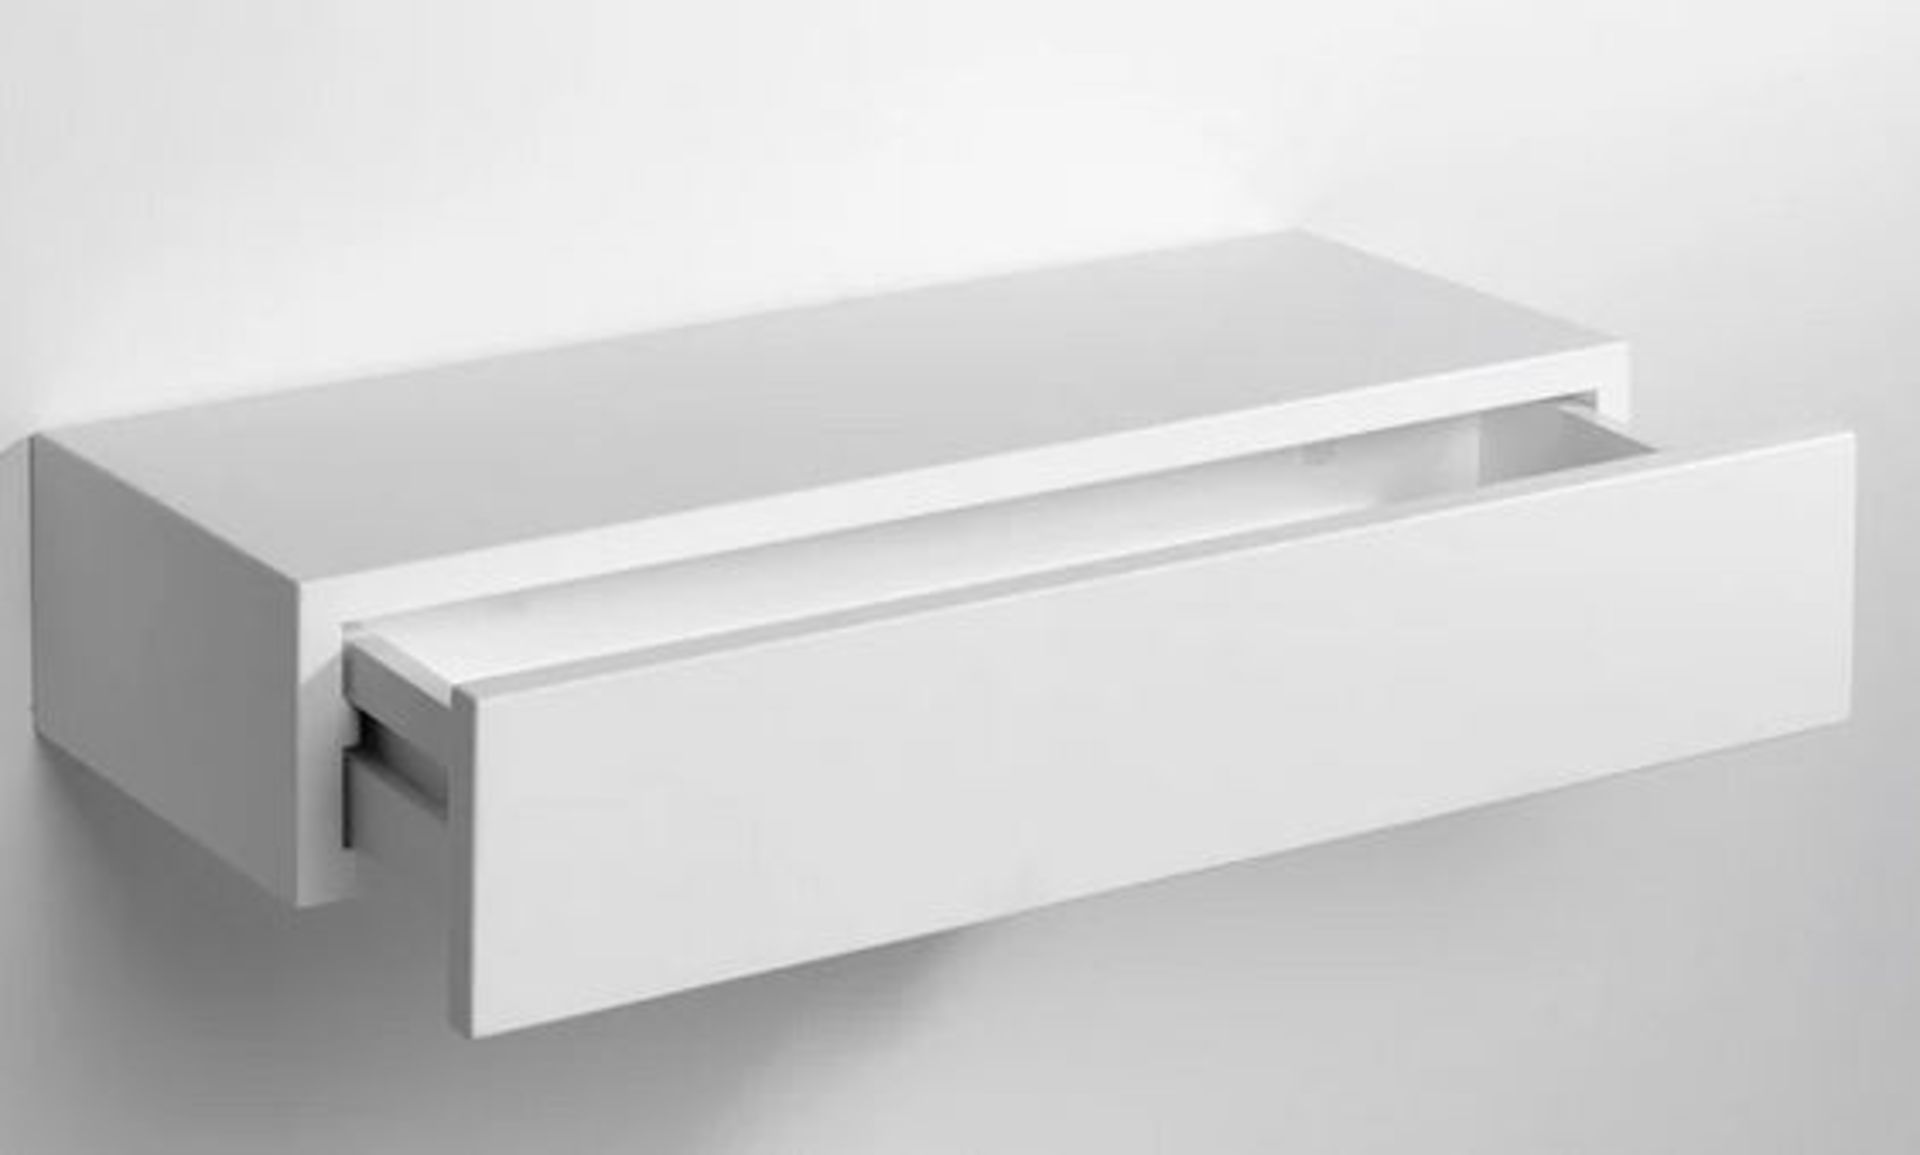 1 BOXED LA REDOUTE VESPA SHELF/DRAWER IN WHITE / RRP £79.00 (VIEWING HIGHLY RECOMMENDED) - Image 2 of 2